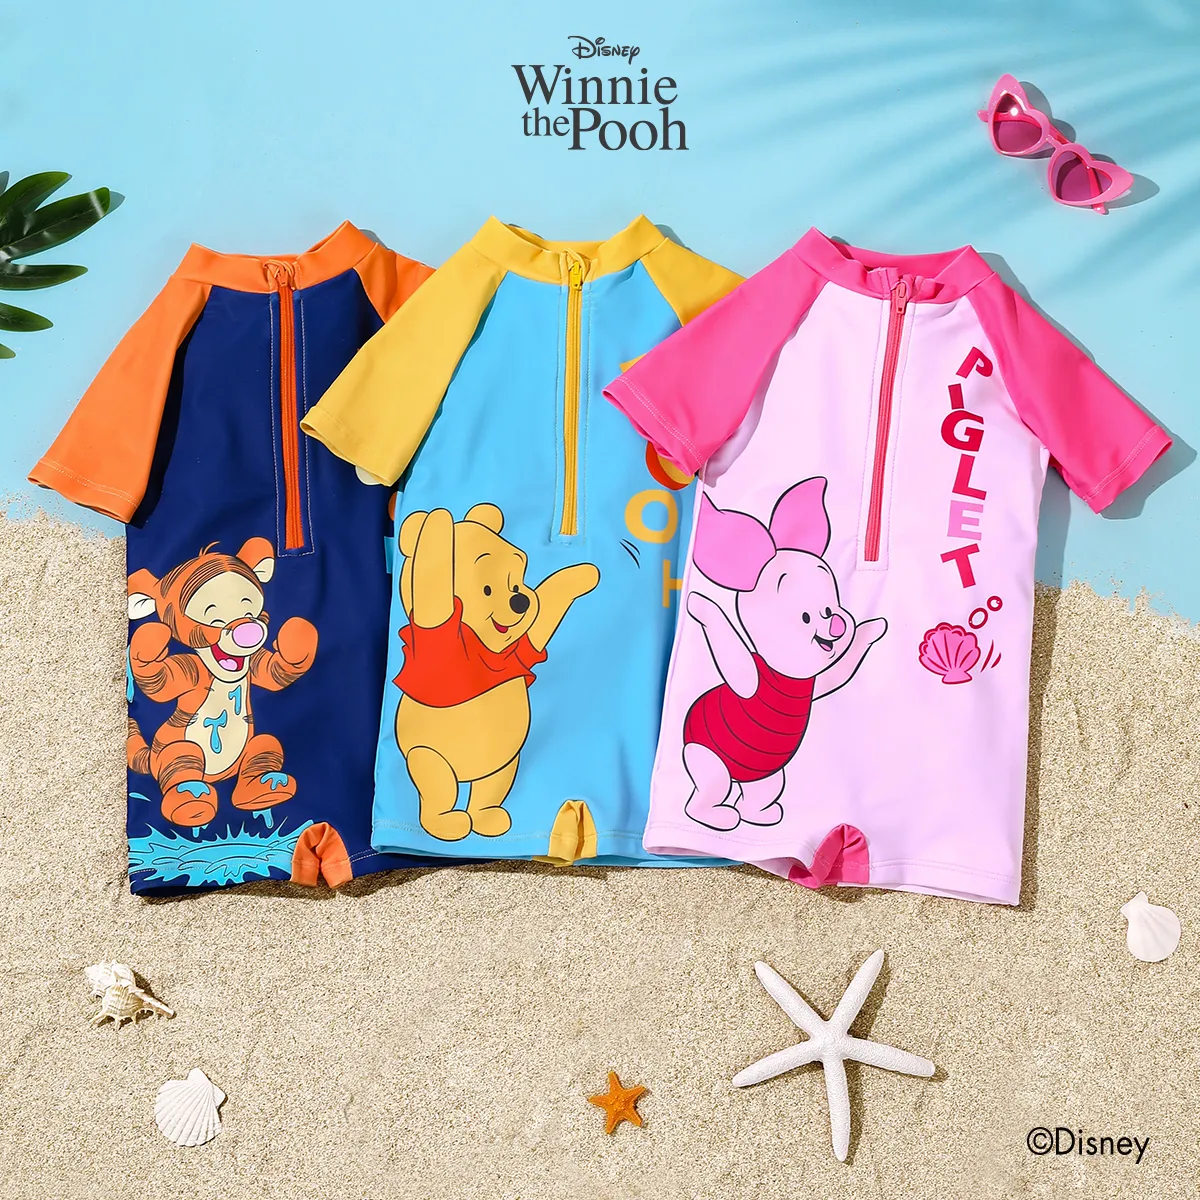 Disney Winnie the Pooh Baby Girl/Boy Character Print Zip Front One Piece Swimsuit Pink big image 1